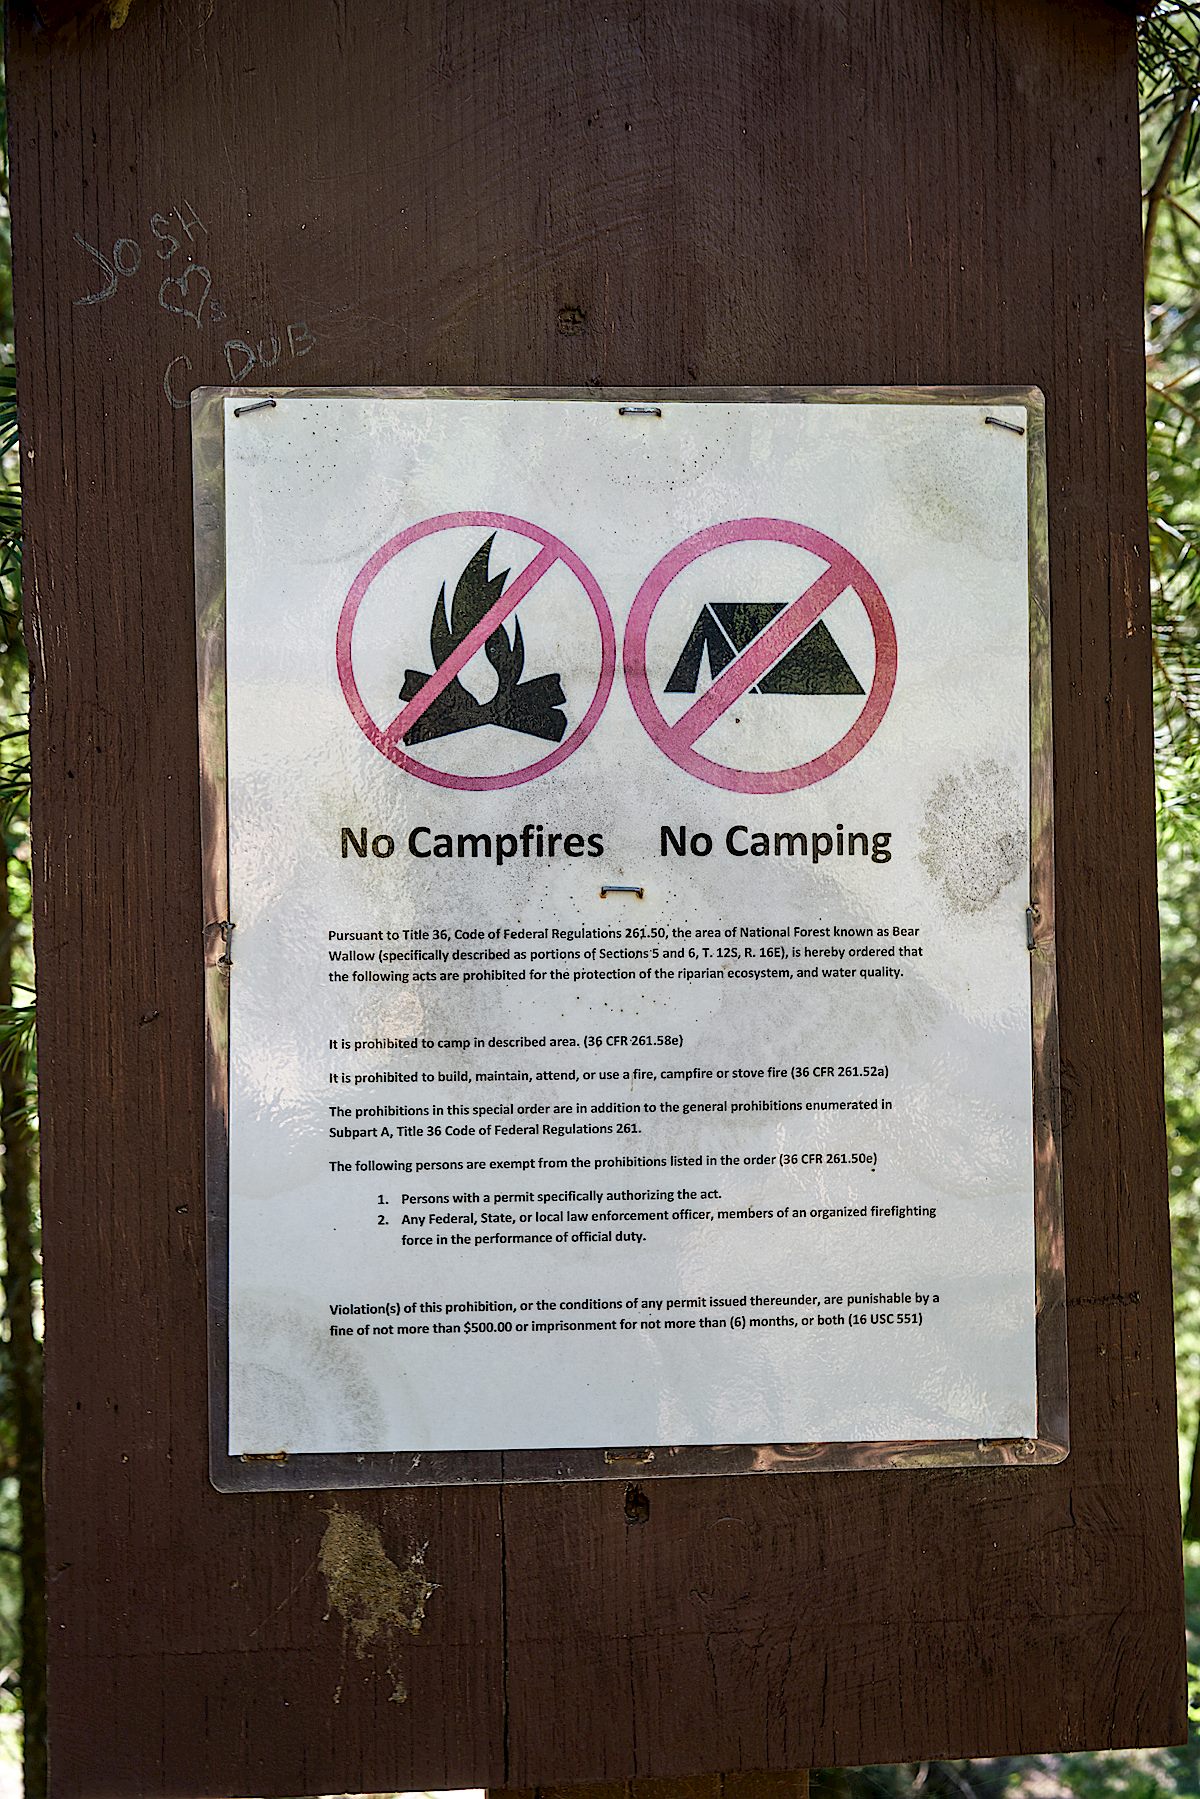 No camping sign in Bear Wallow. August 2017.